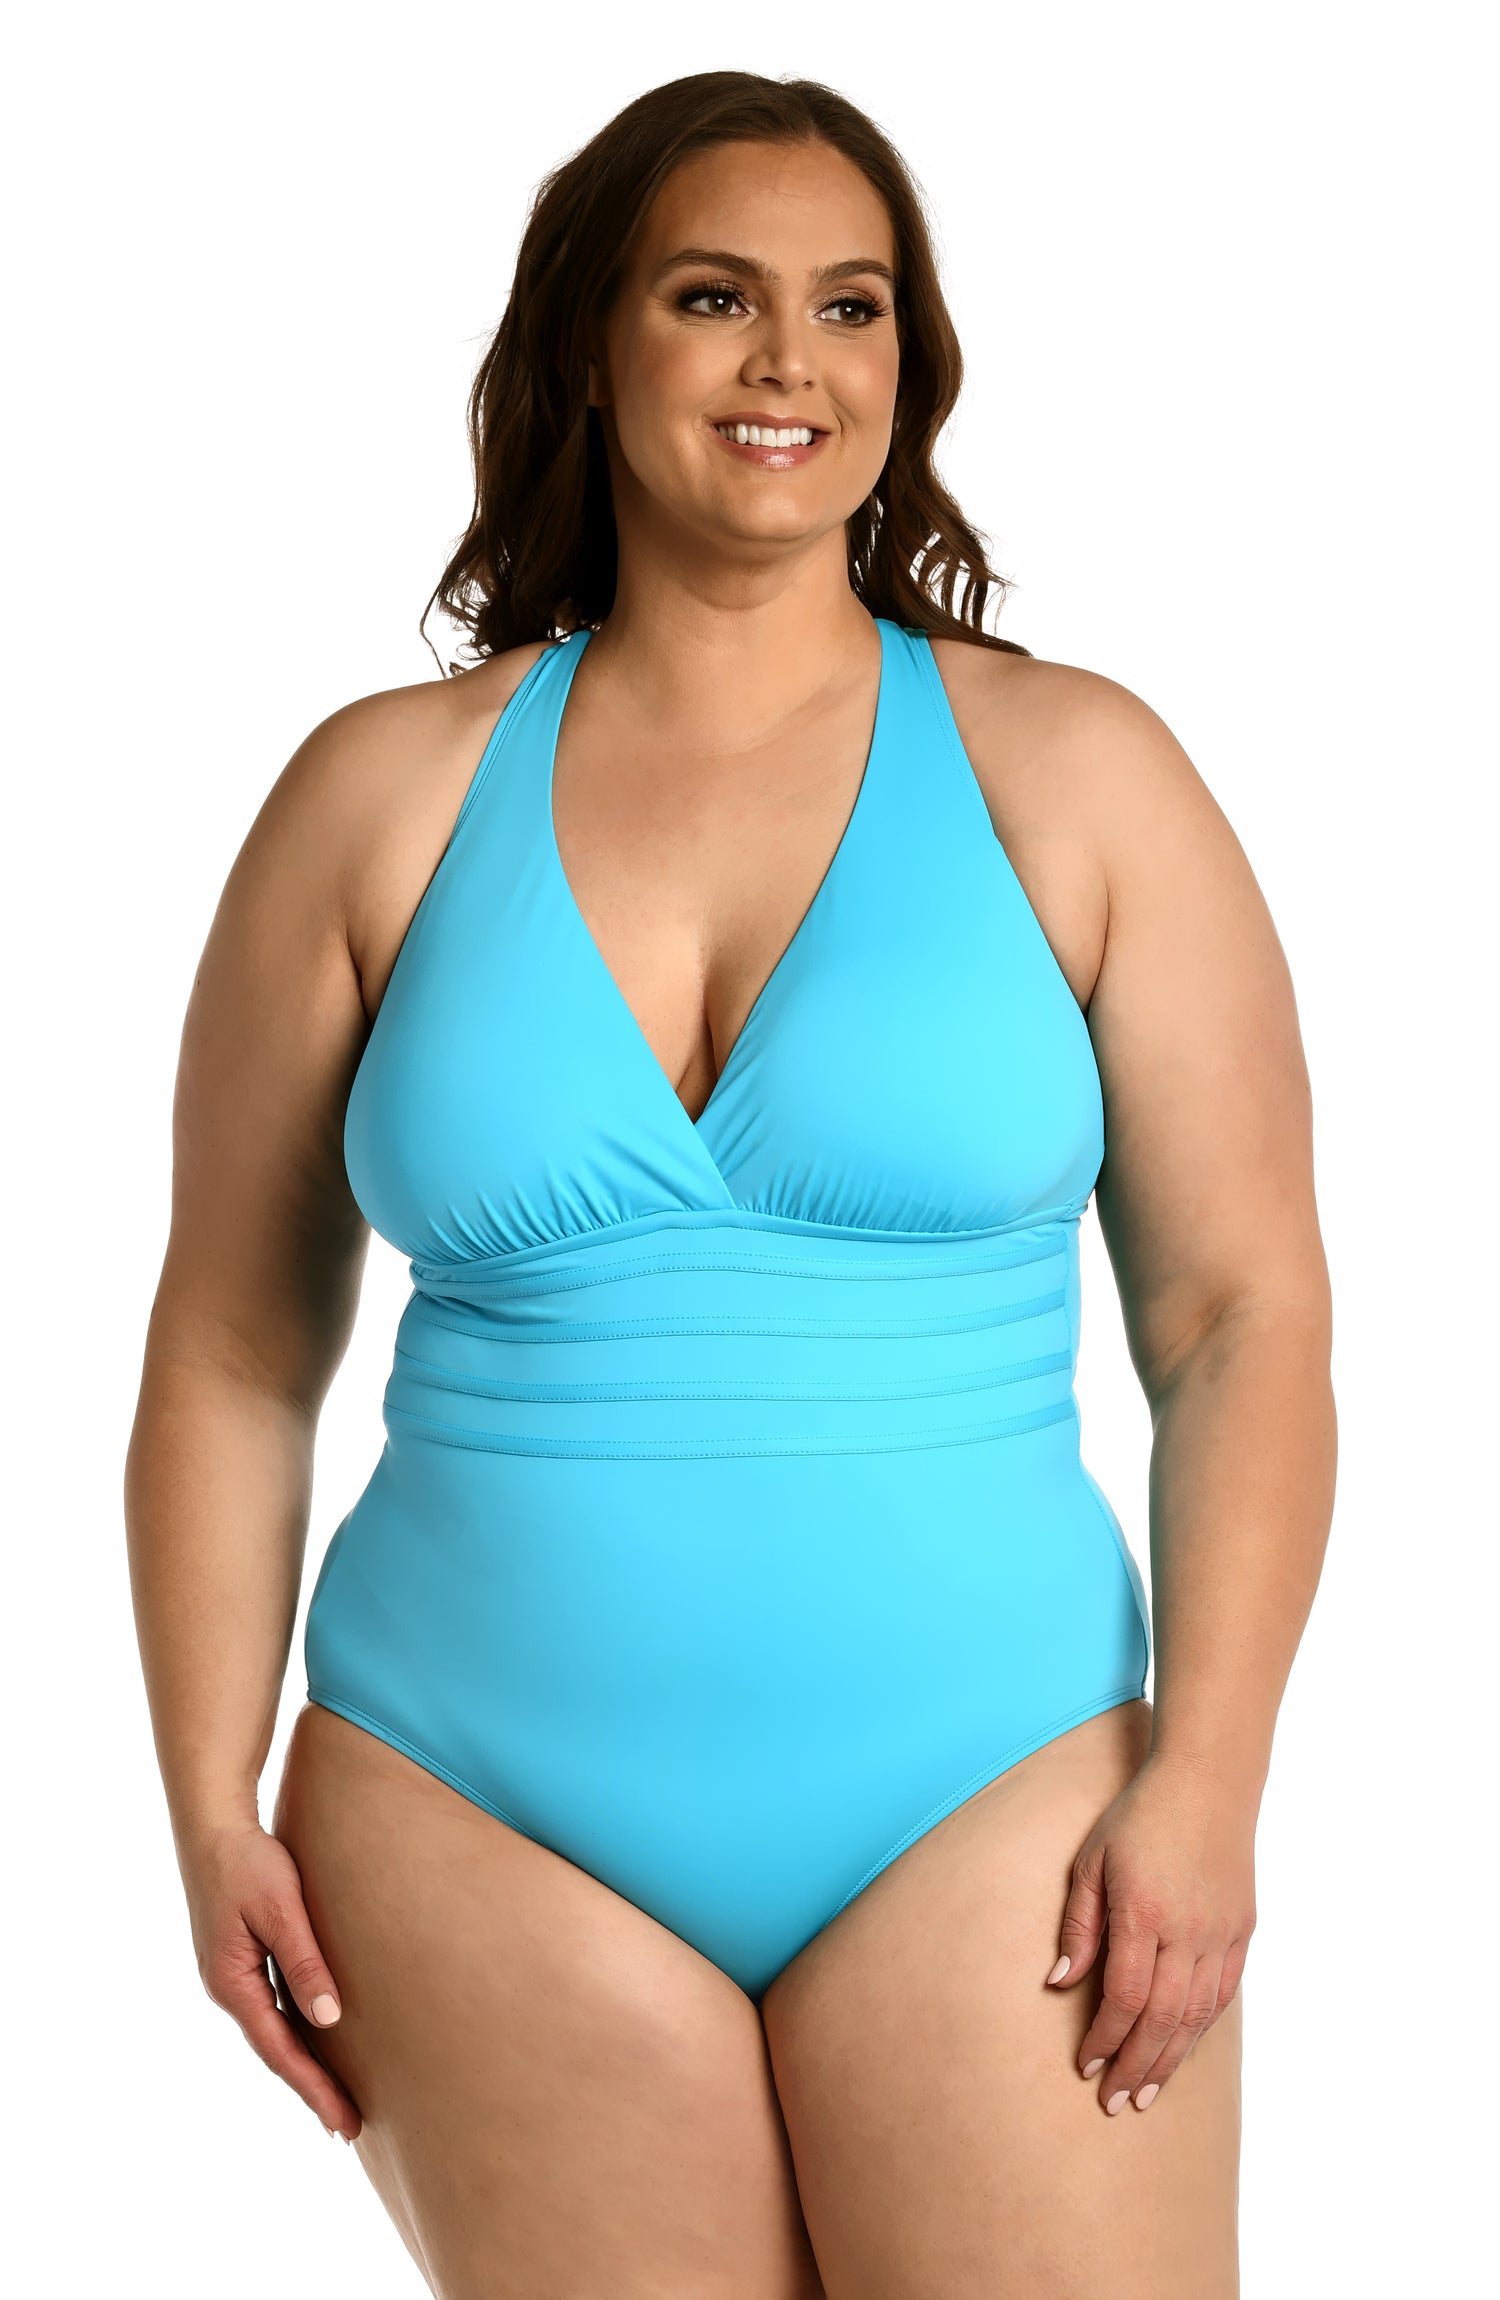 Model is wearing a azul (light blue) colored one piece swimsuit from our Best-Selling Island Goddess collection.